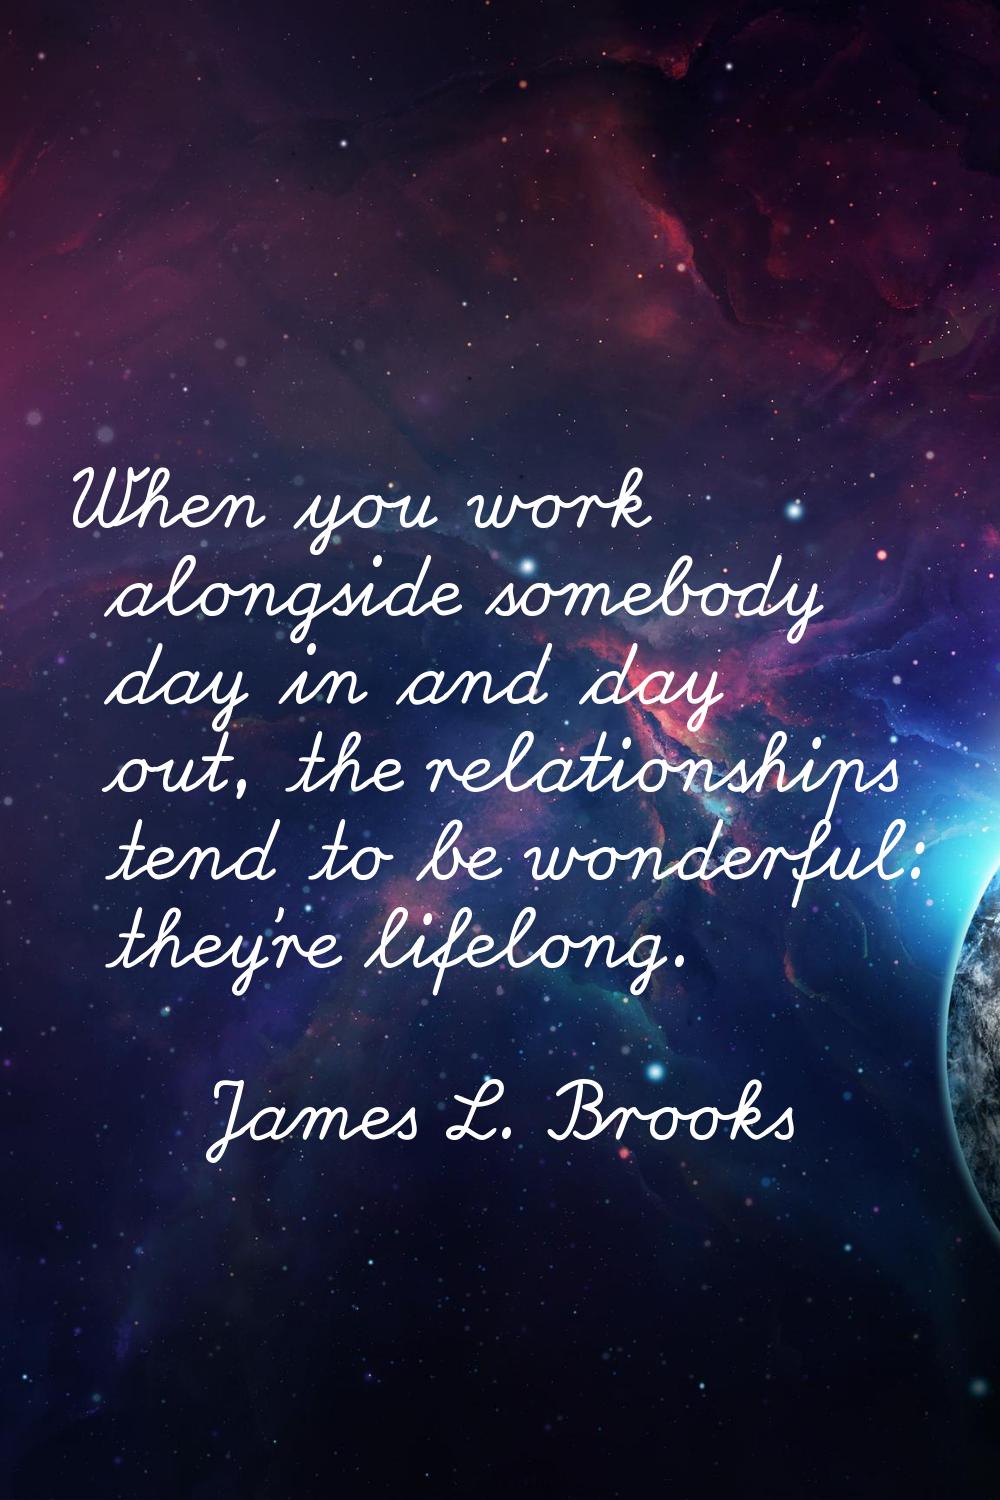 When you work alongside somebody day in and day out, the relationships tend to be wonderful: they'r